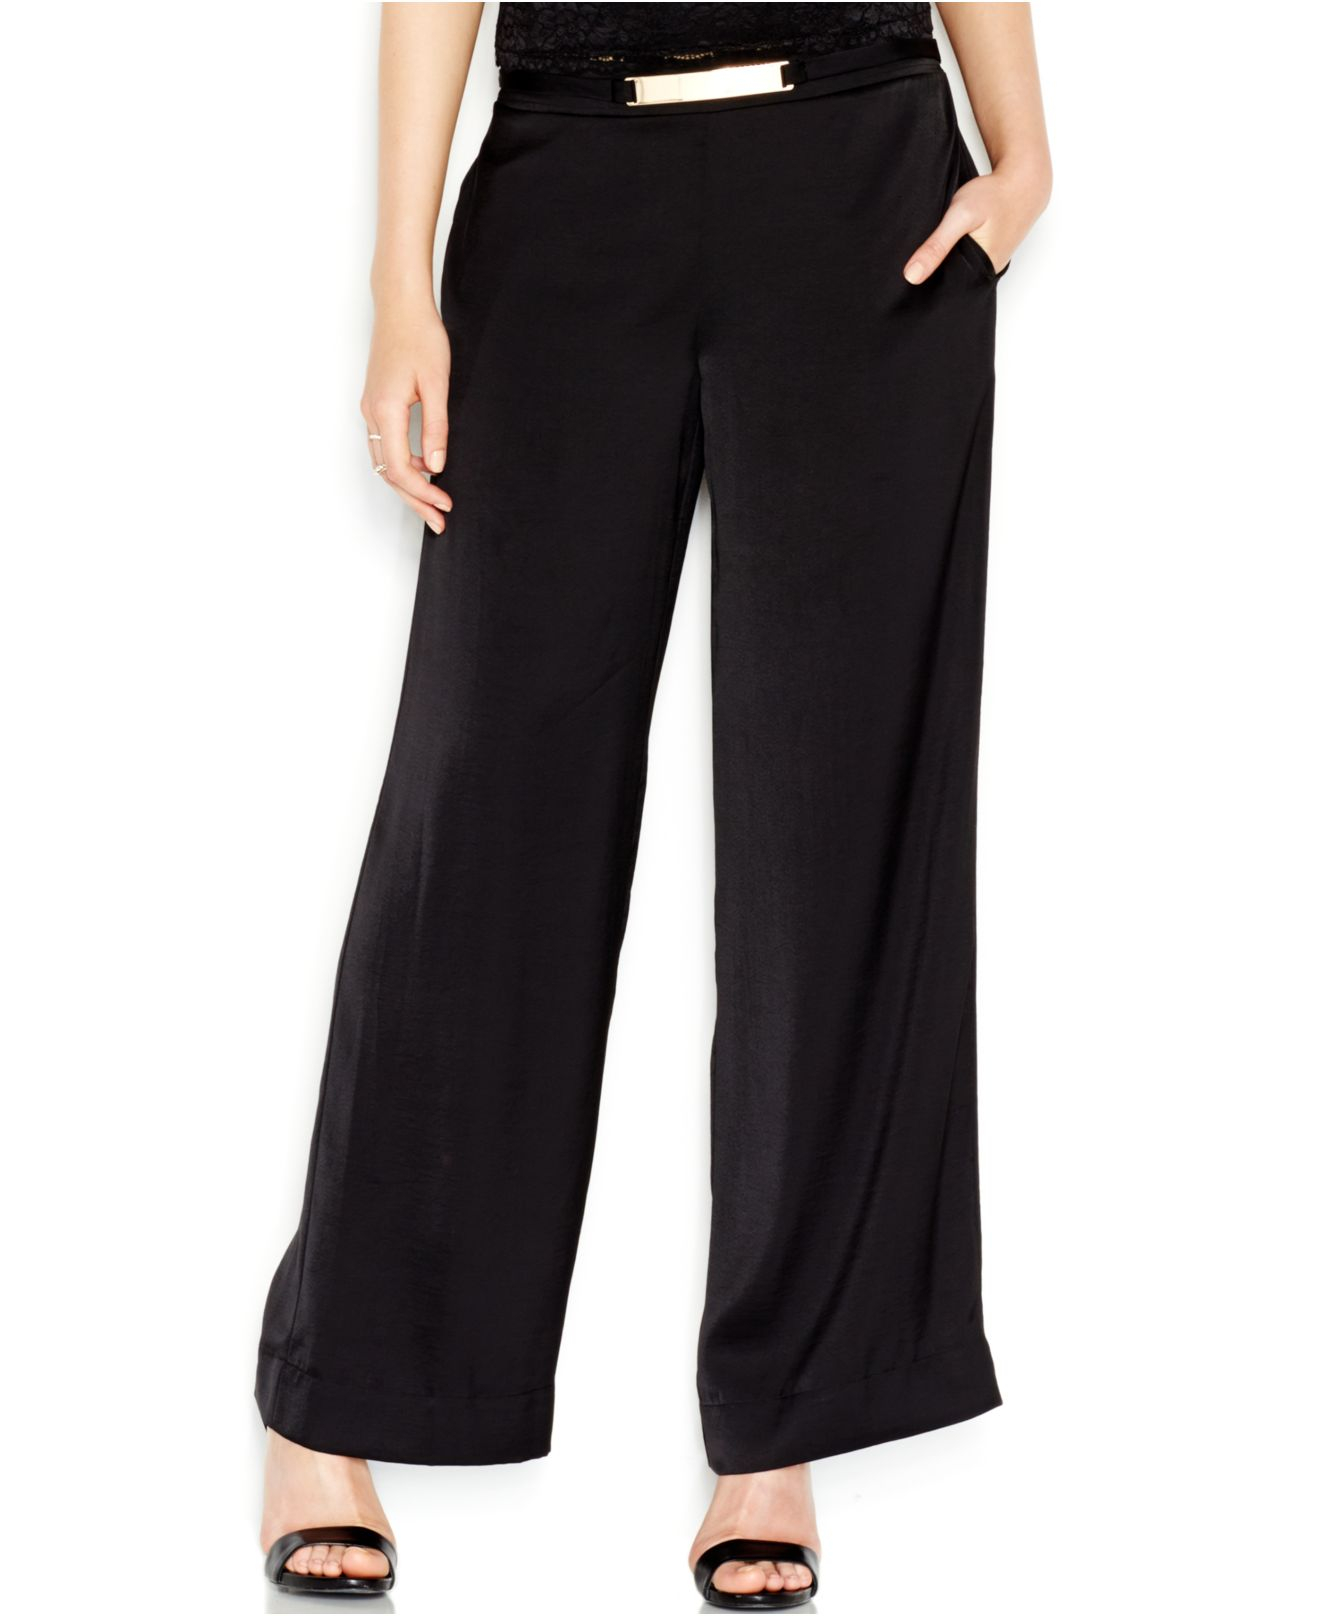 Lyst - Guess Palazzo Pants in Black